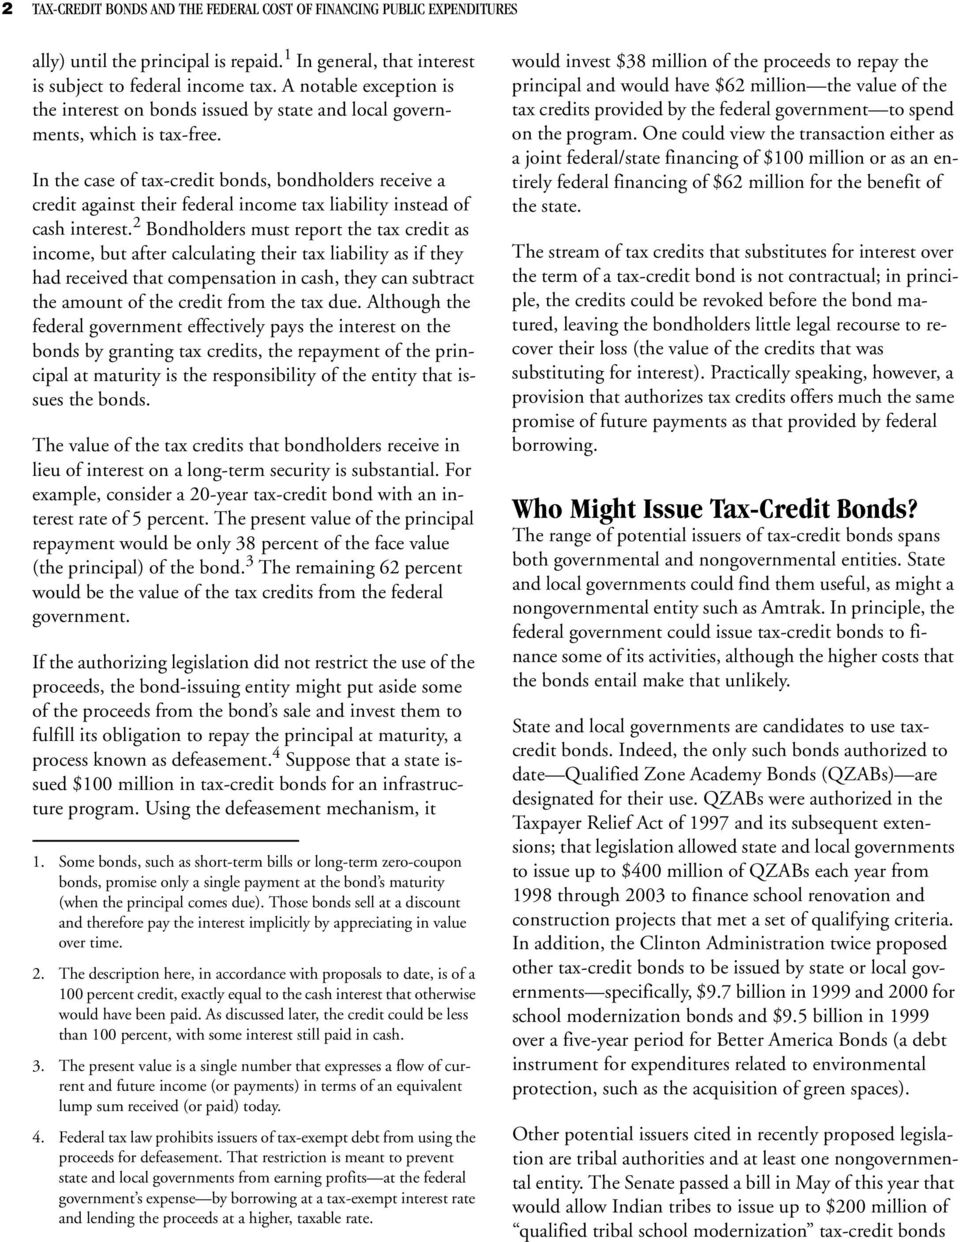 In the case of tax-credit bonds, bondholders receive a credit against their federal income tax liability instead of cash interest.